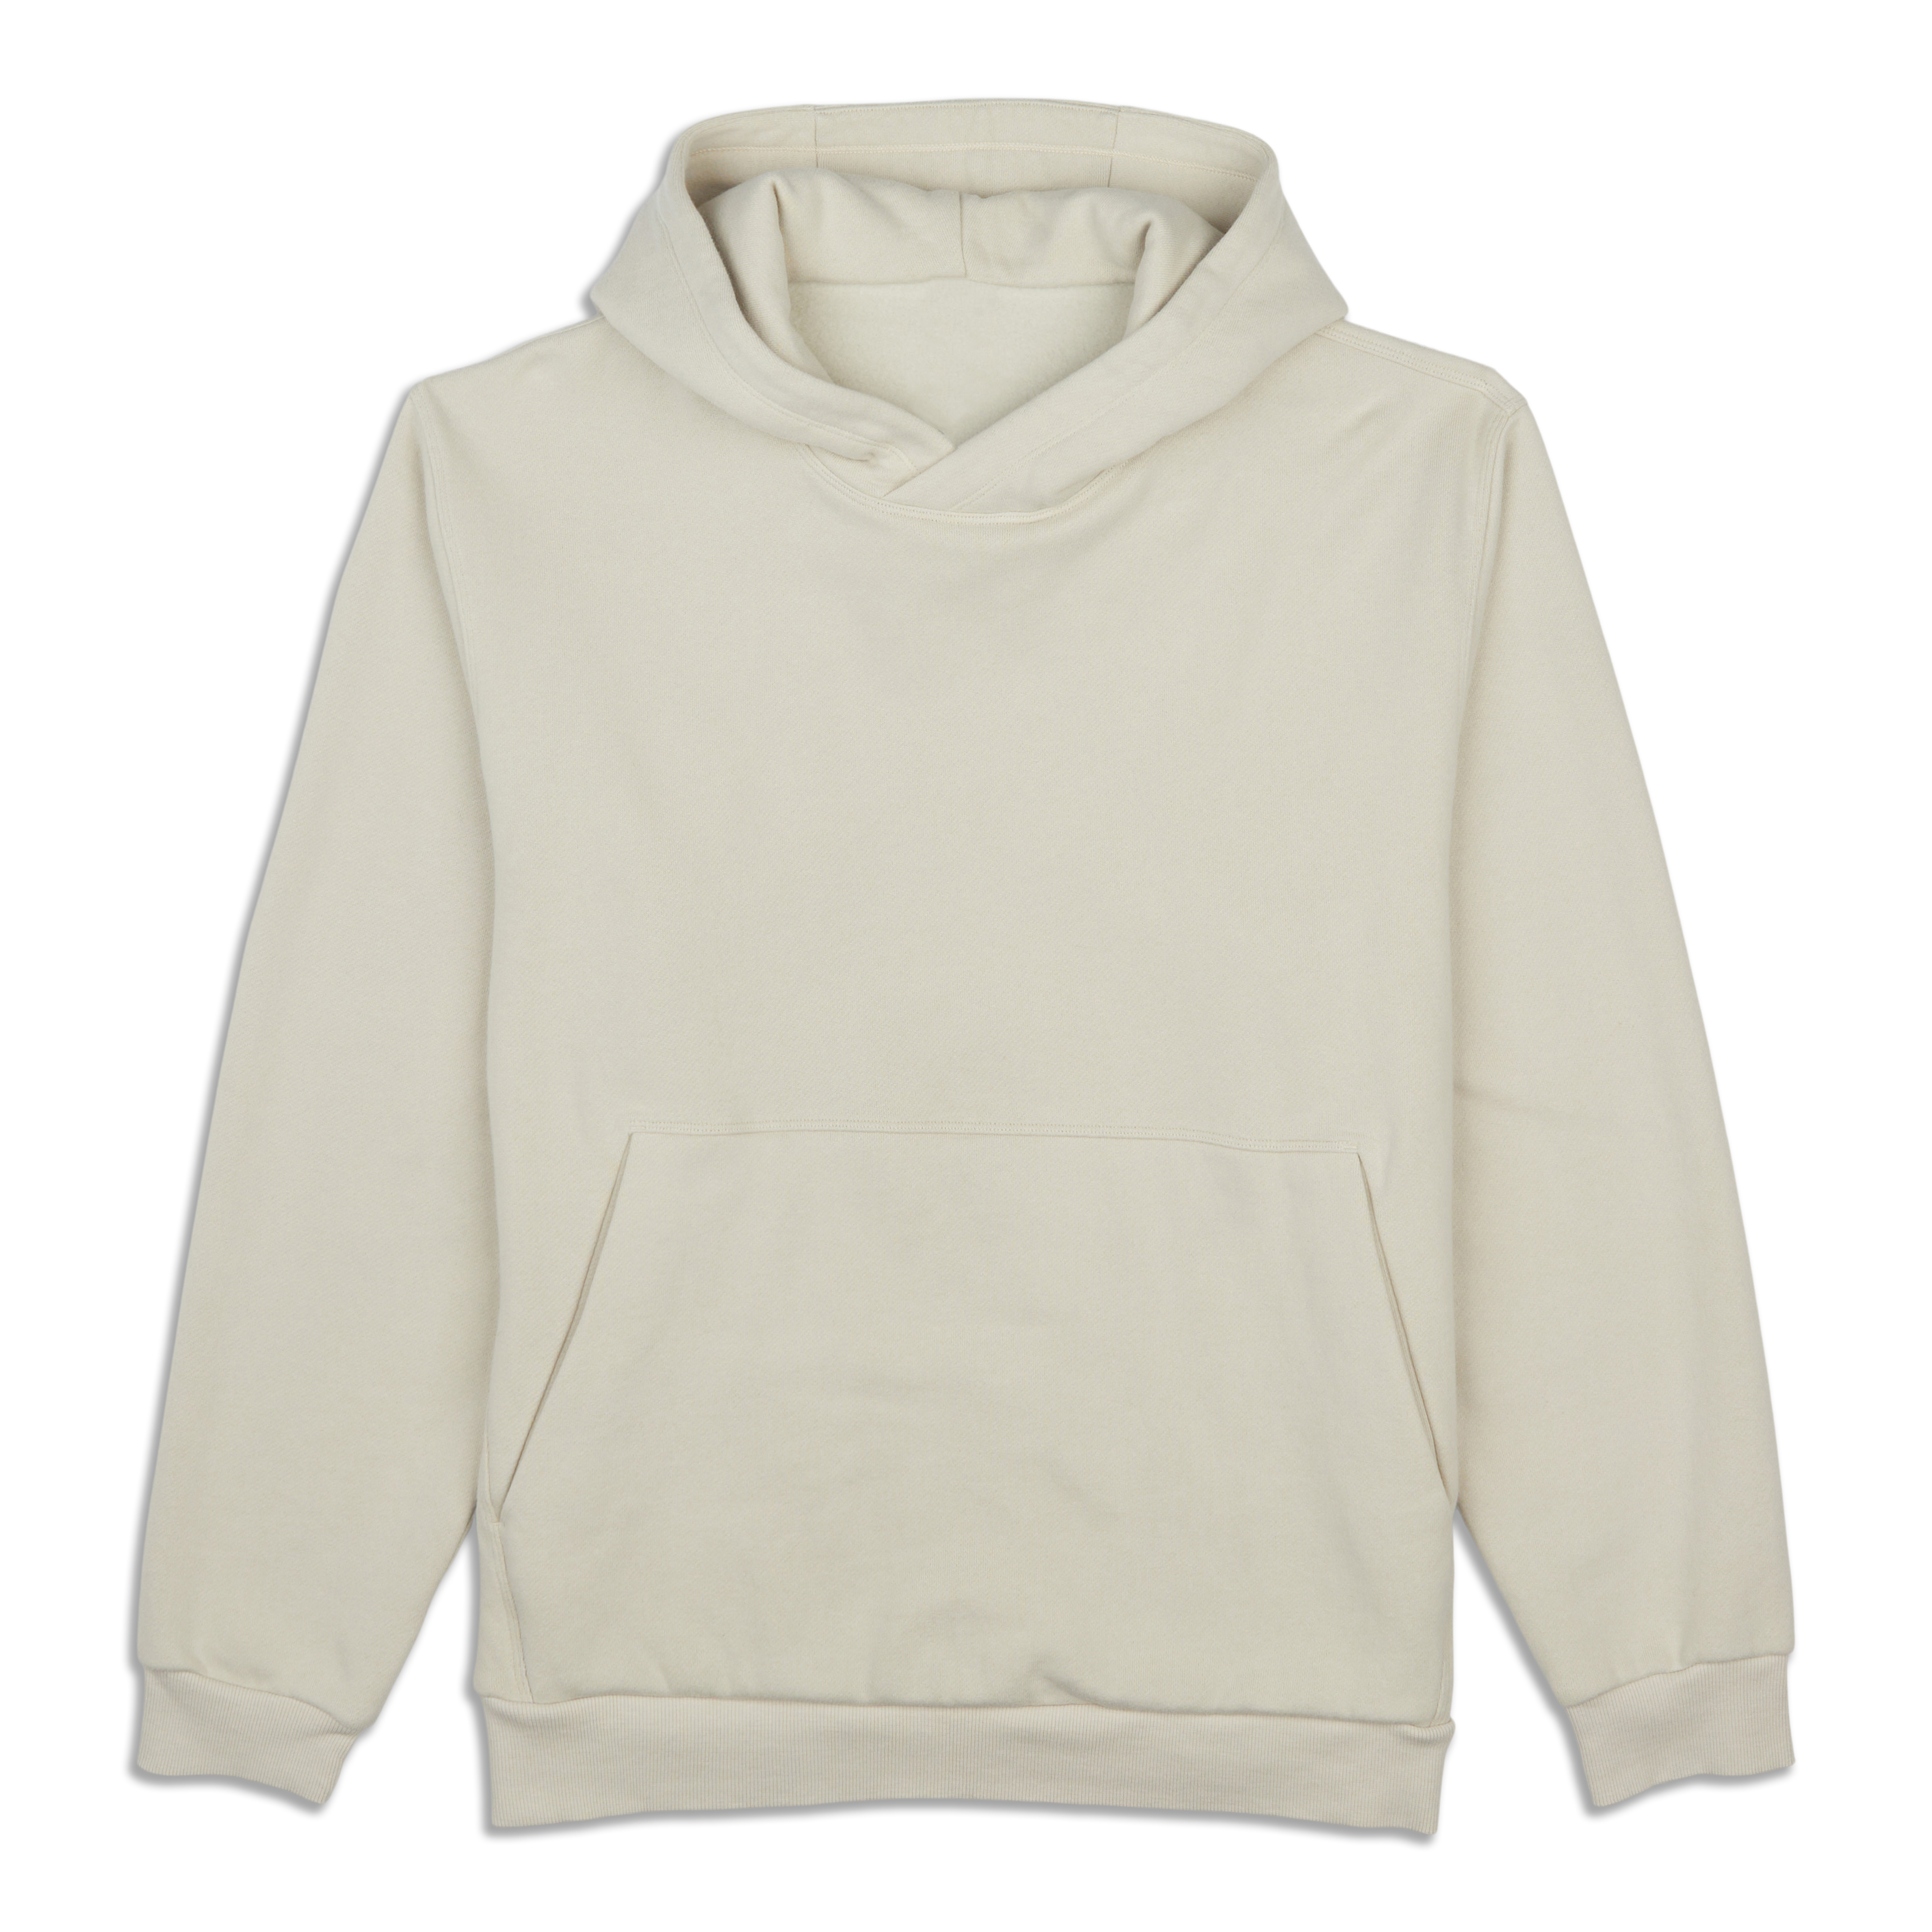 Lululemon Steady State Hoodie Color Natural Ivory Size: L. Retail